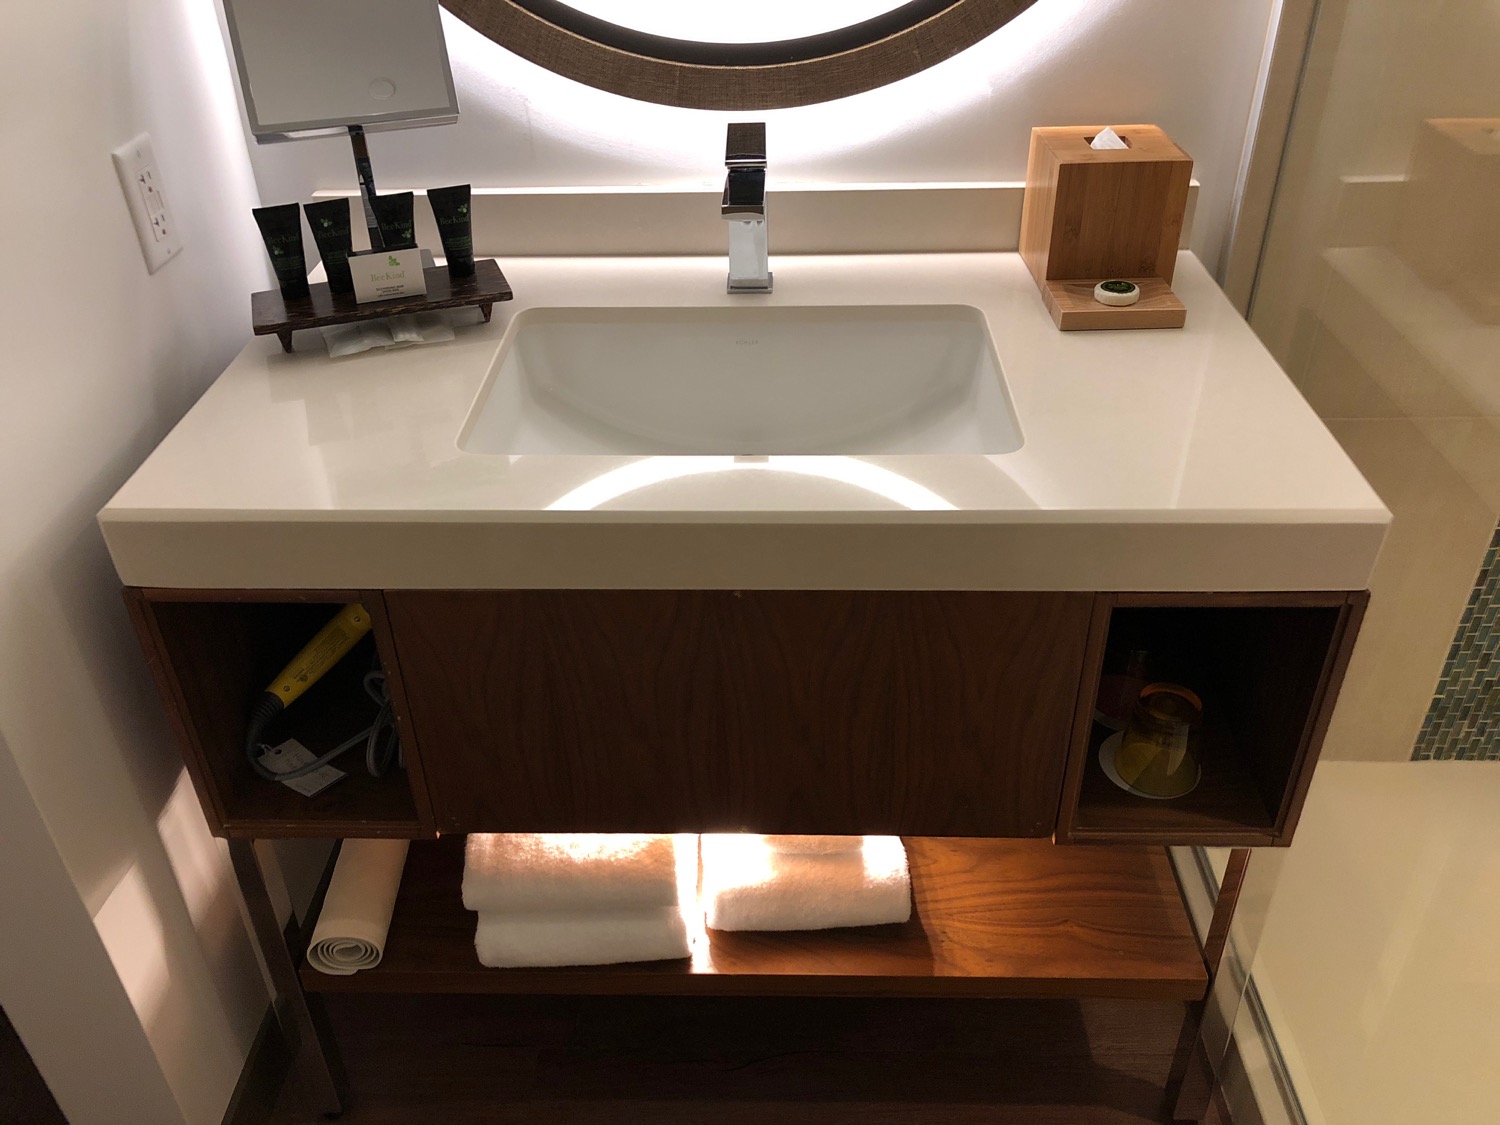 a bathroom sink with a round mirror above it